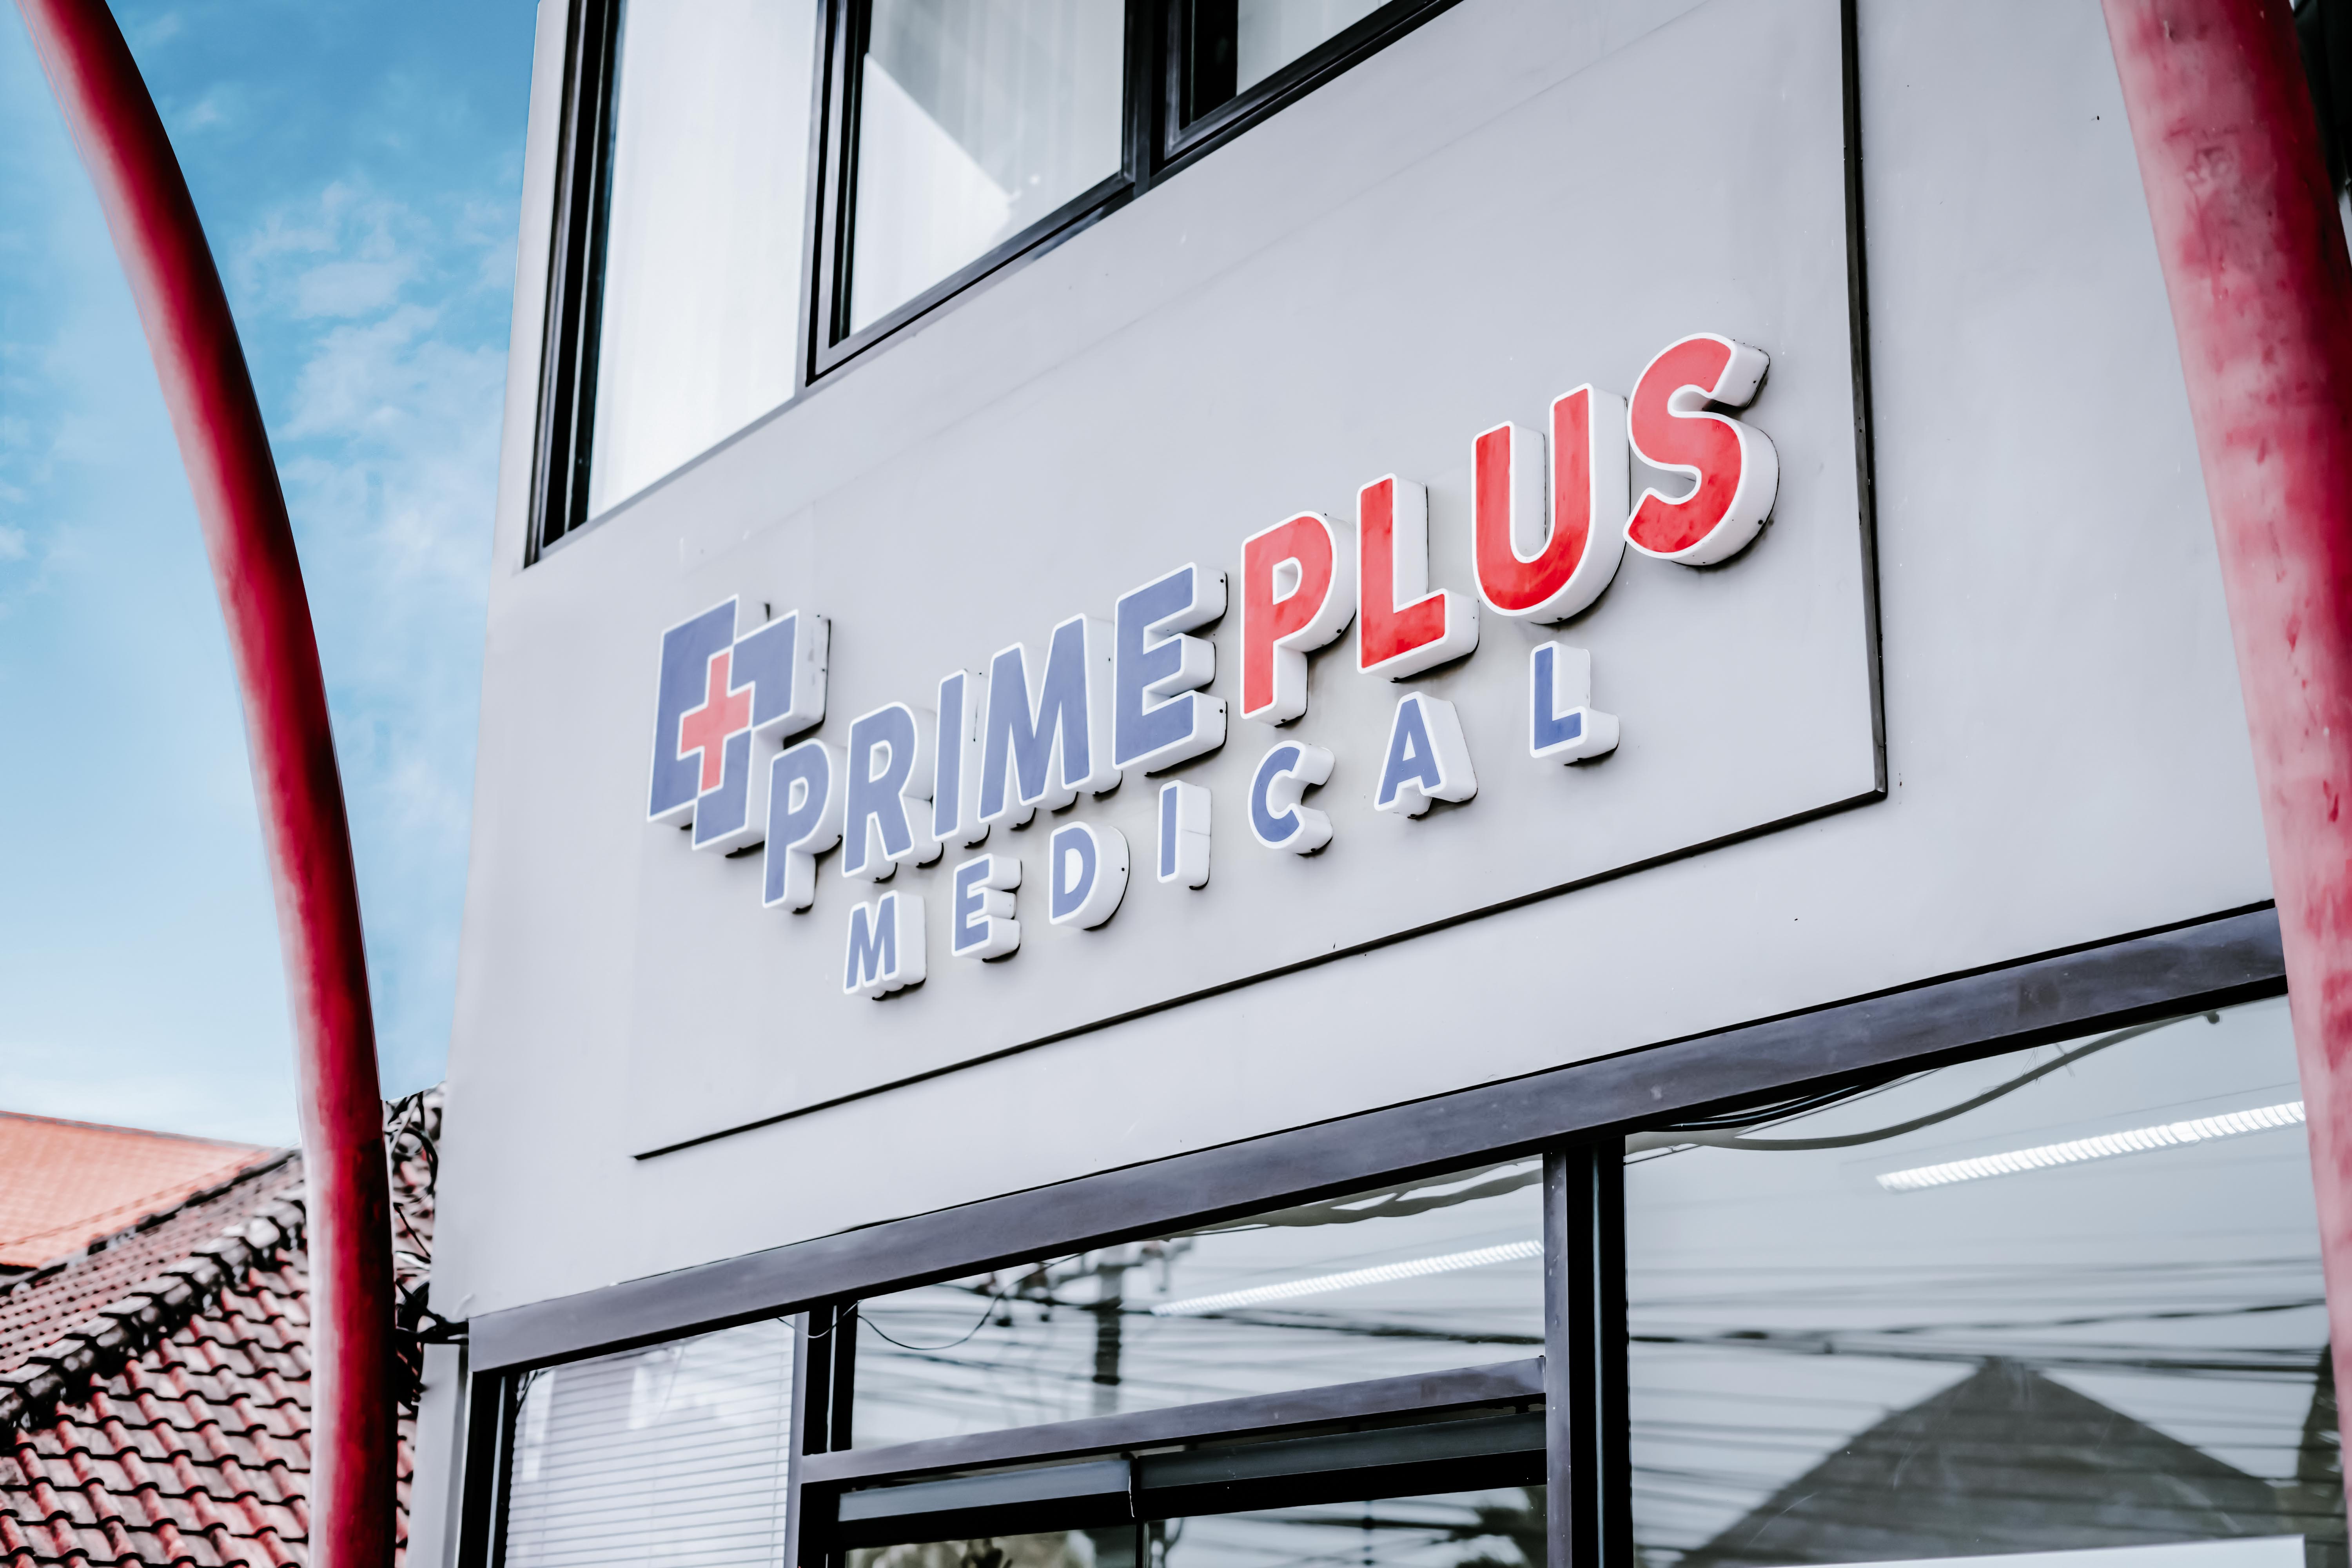 CLINIC NEAR ME - 24/7 On-Call Doctor Service - Prime Plus Medical